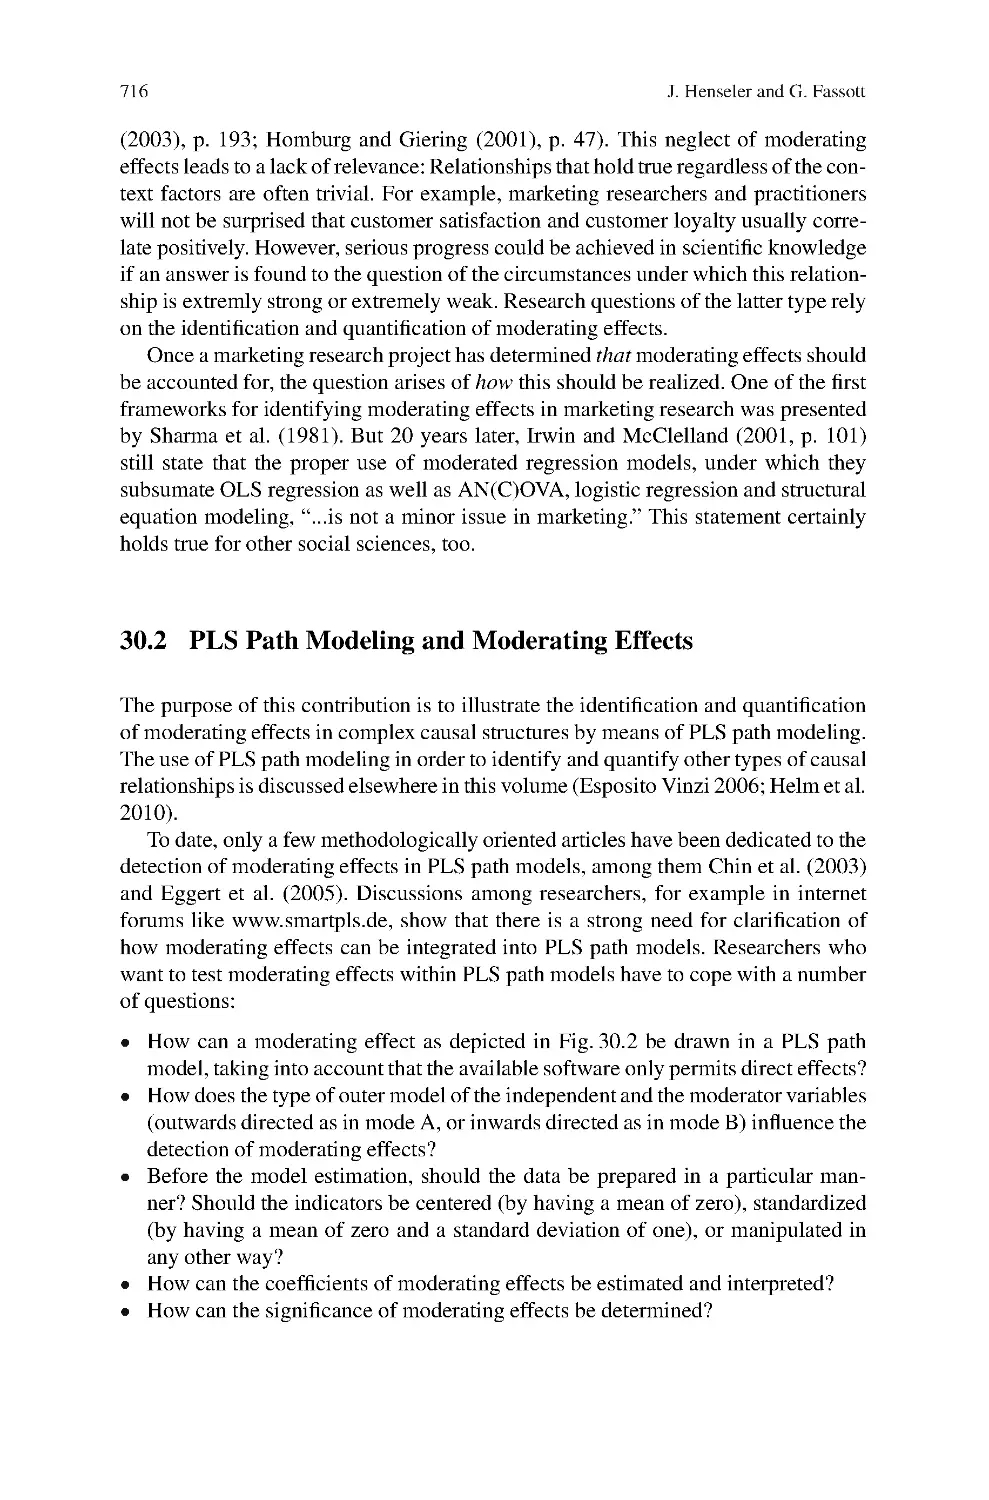 30.2 PLS Path Modeling and Moderating Effects